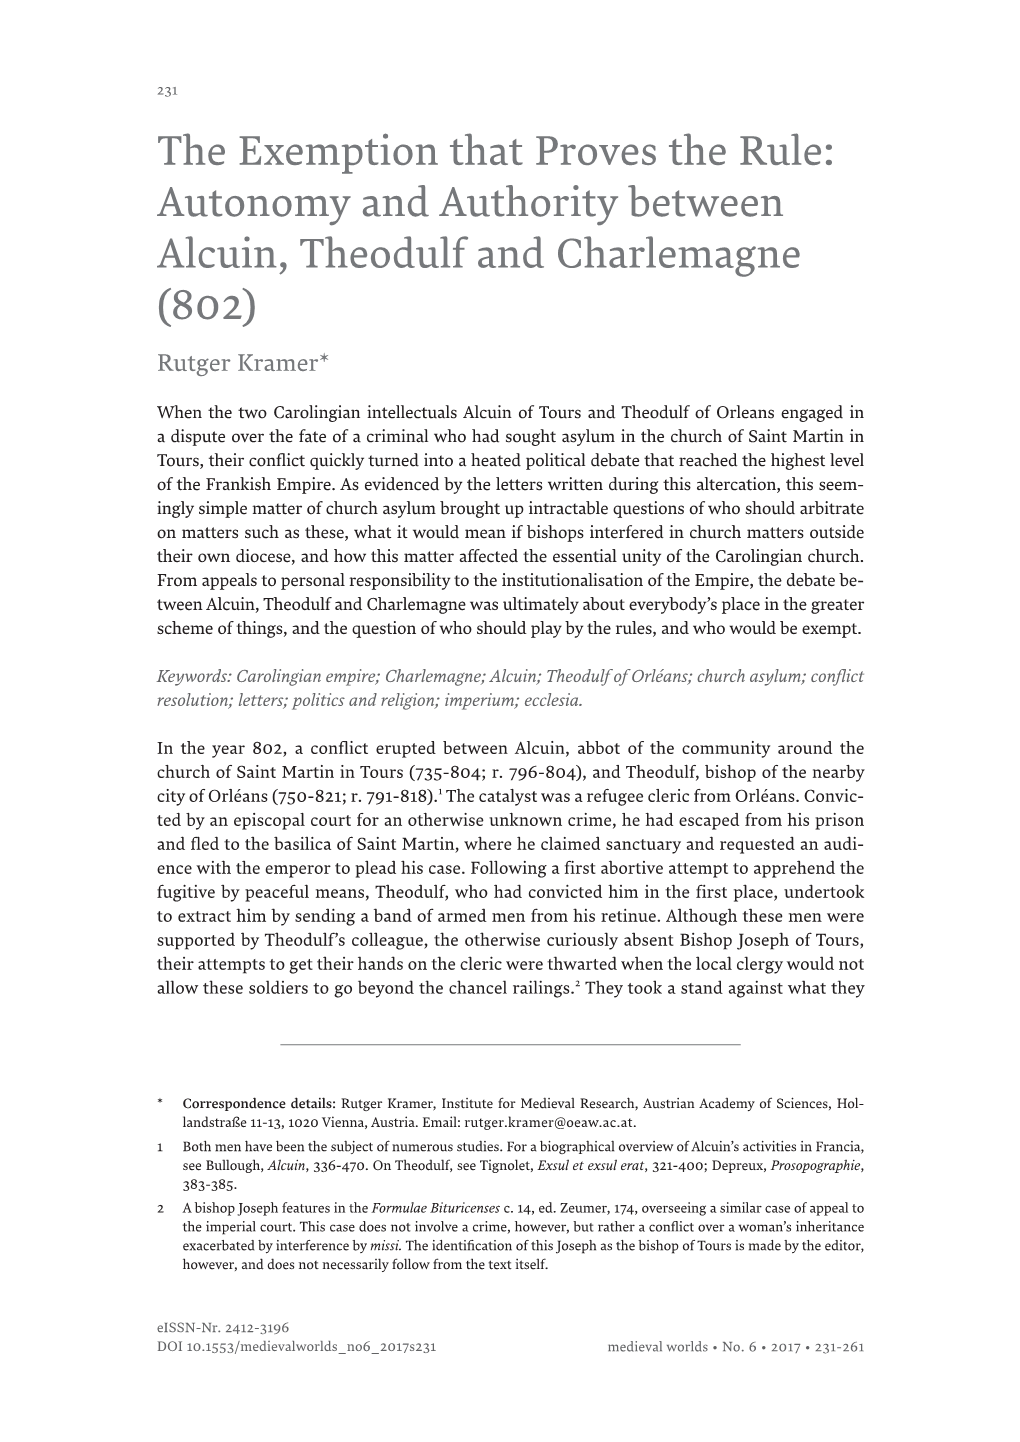 Autonomy and Authority Between Alcuin, Theodulf and Charlemagne (802) Rutger Kramer*